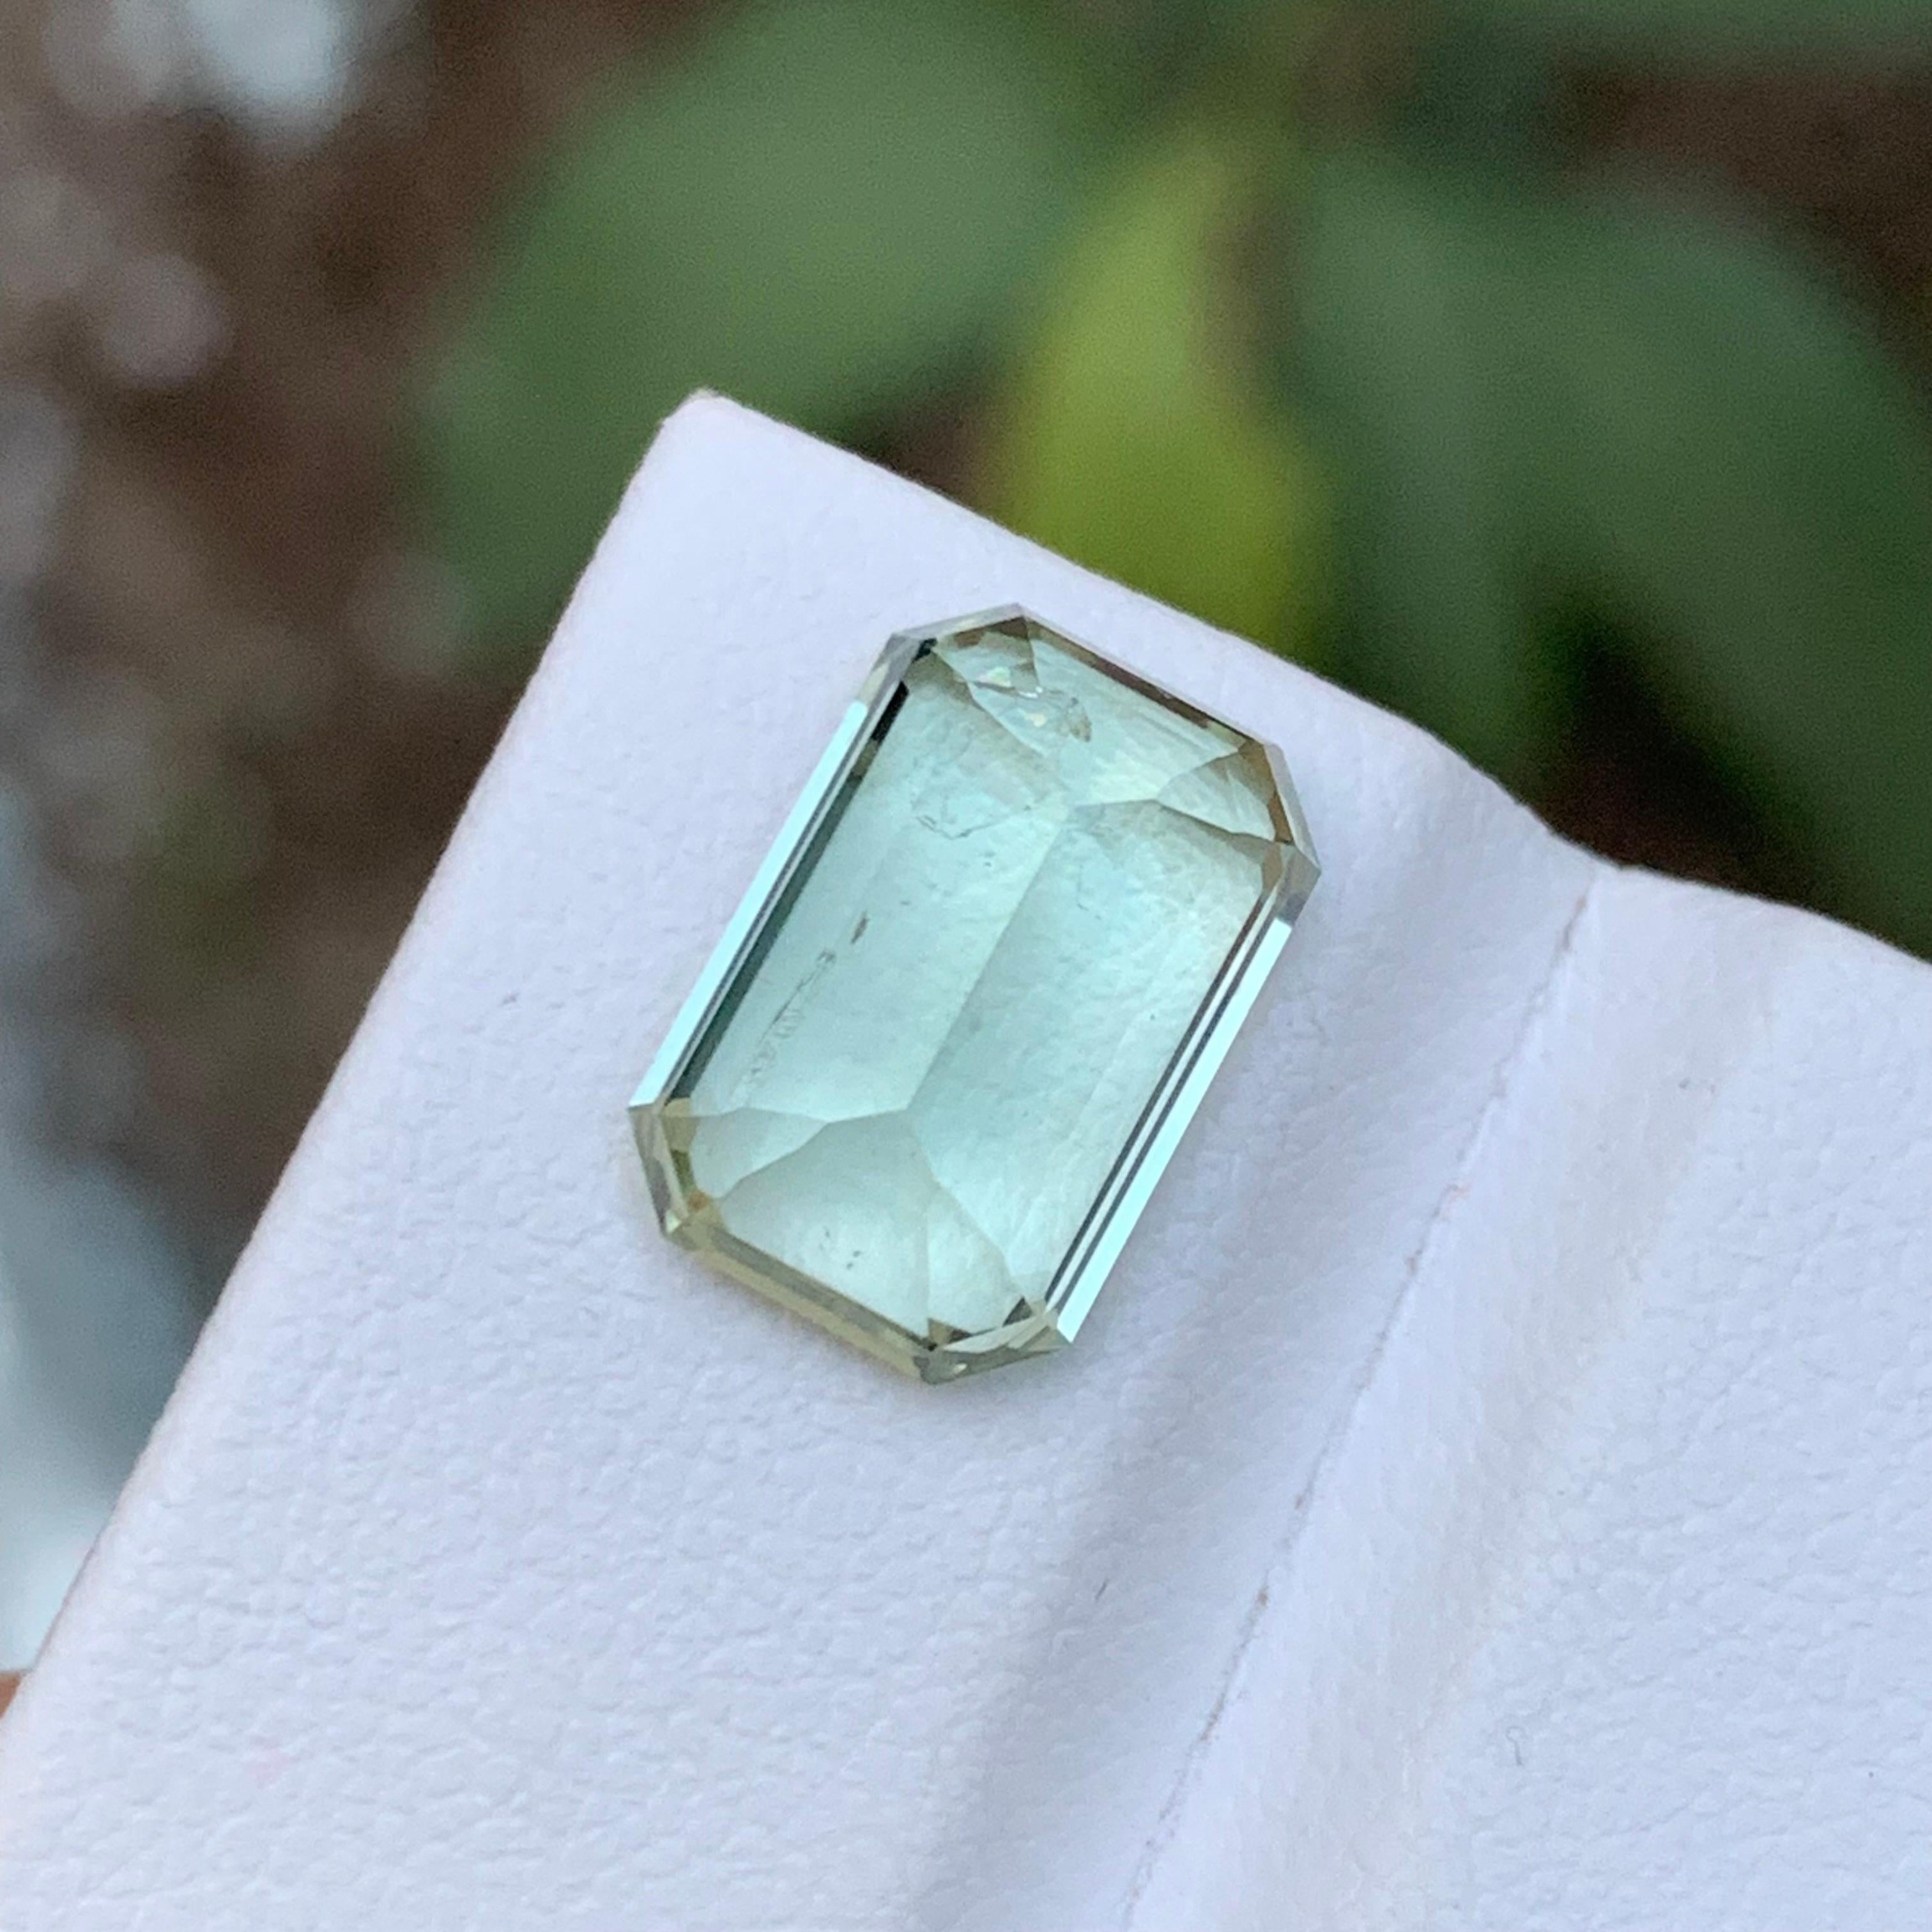 Contemporary Rare Pastel Green Natural Tourmaline Gemstone, 5.05 Ct Emerald Cut-Ring/Jewelry For Sale